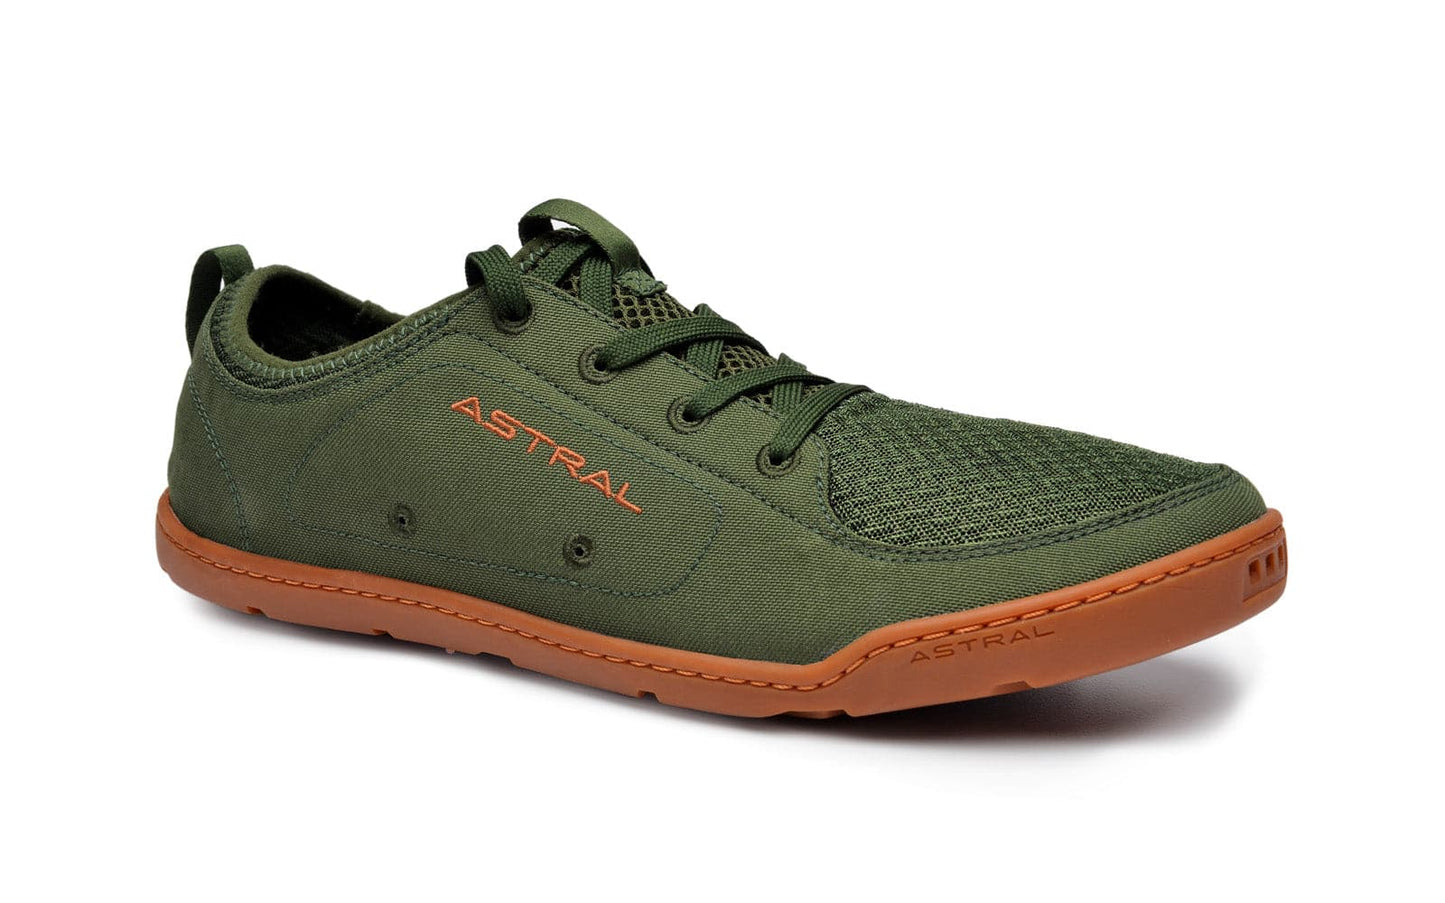 Featuring the Loyak - Men's men's footwear manufactured by Astral shown here from a fifth angle.